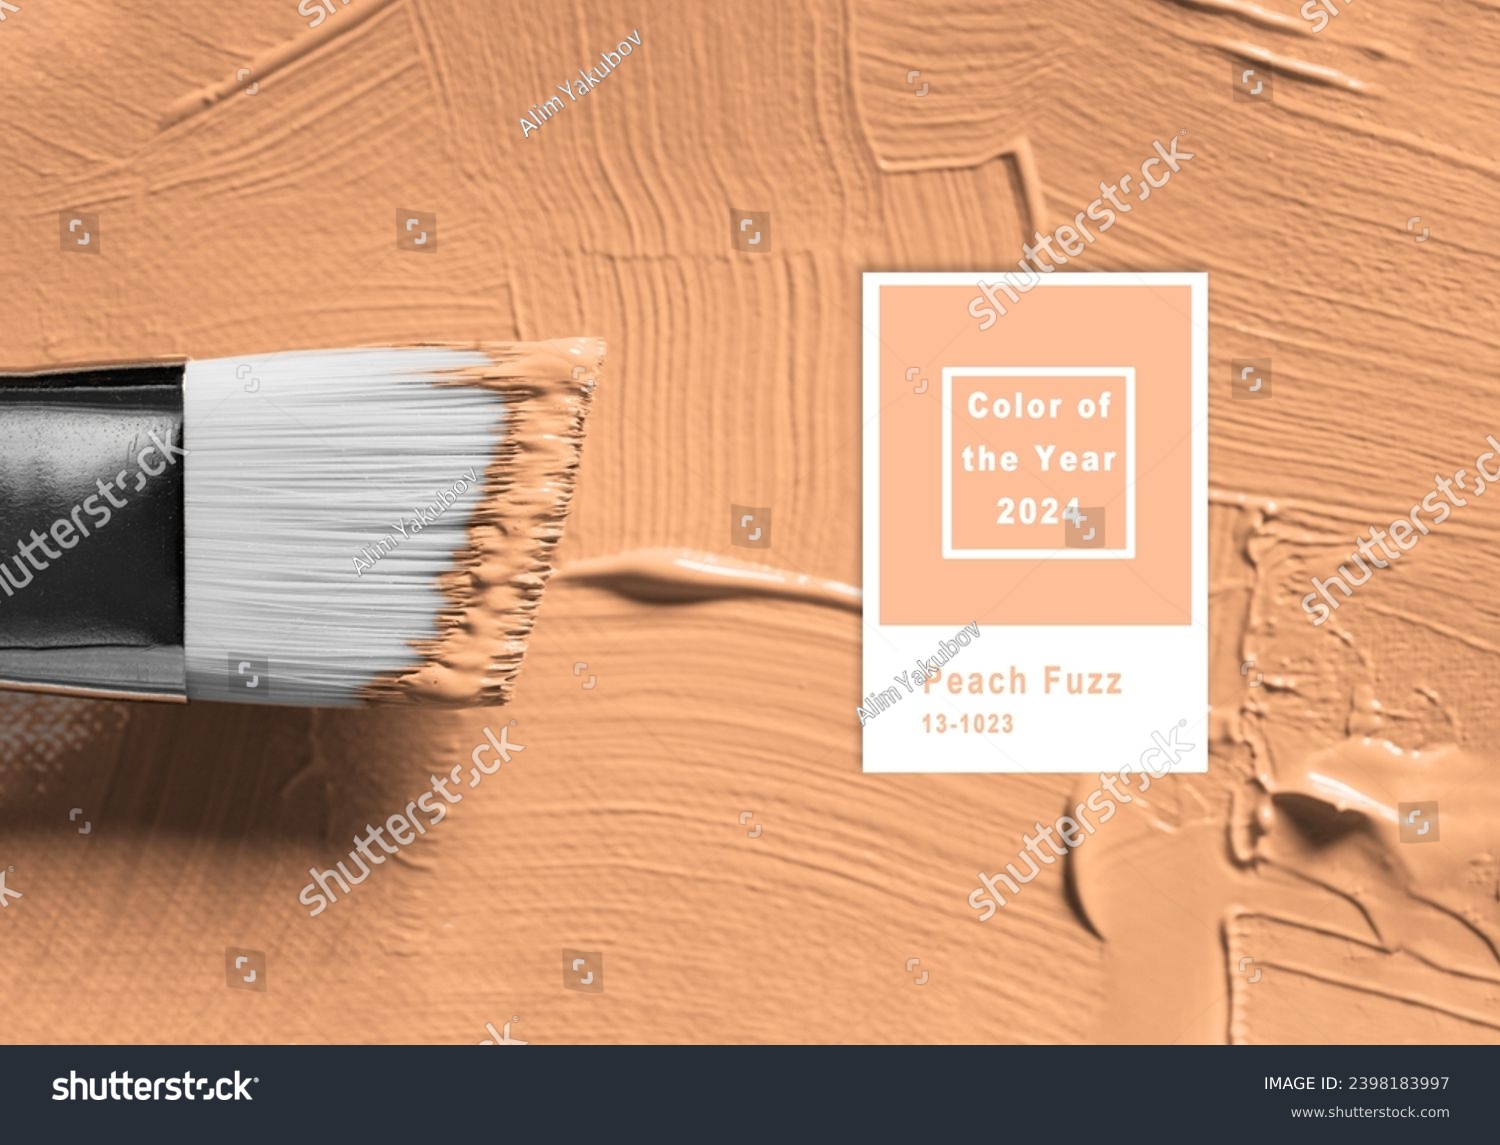 New trending PANTONE 13-1023 Peach Fuzz colour of 2024 year oil paint stroke on white background
 #2398183997